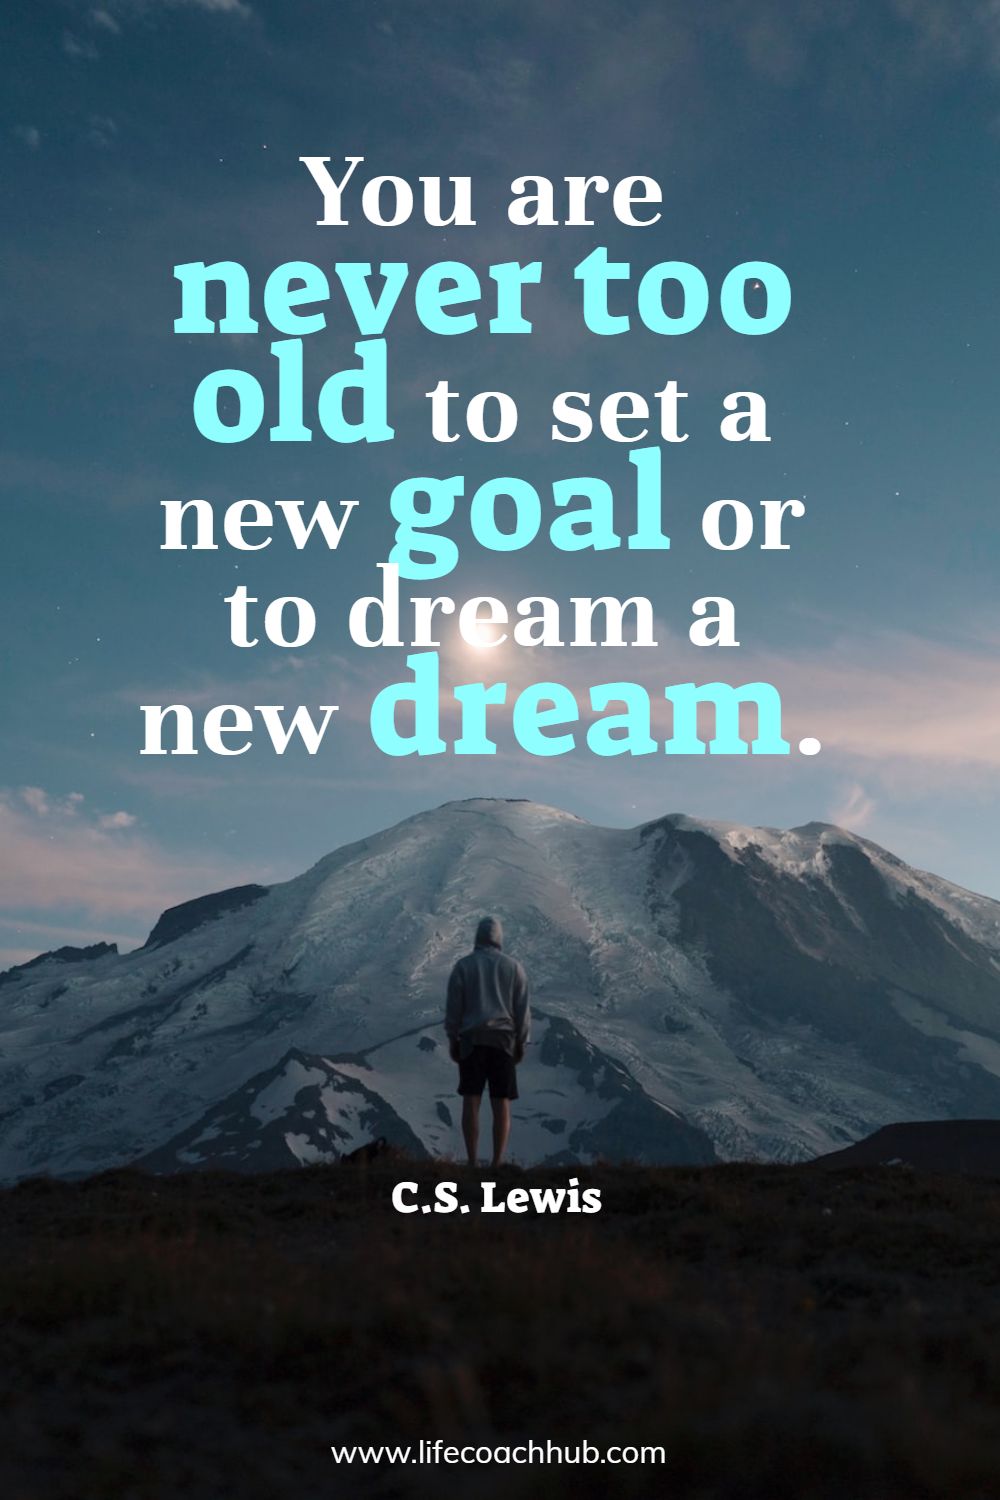 You are never too old to set a new goal or to dream a new dream. C.S. Lewis Coaching Quote